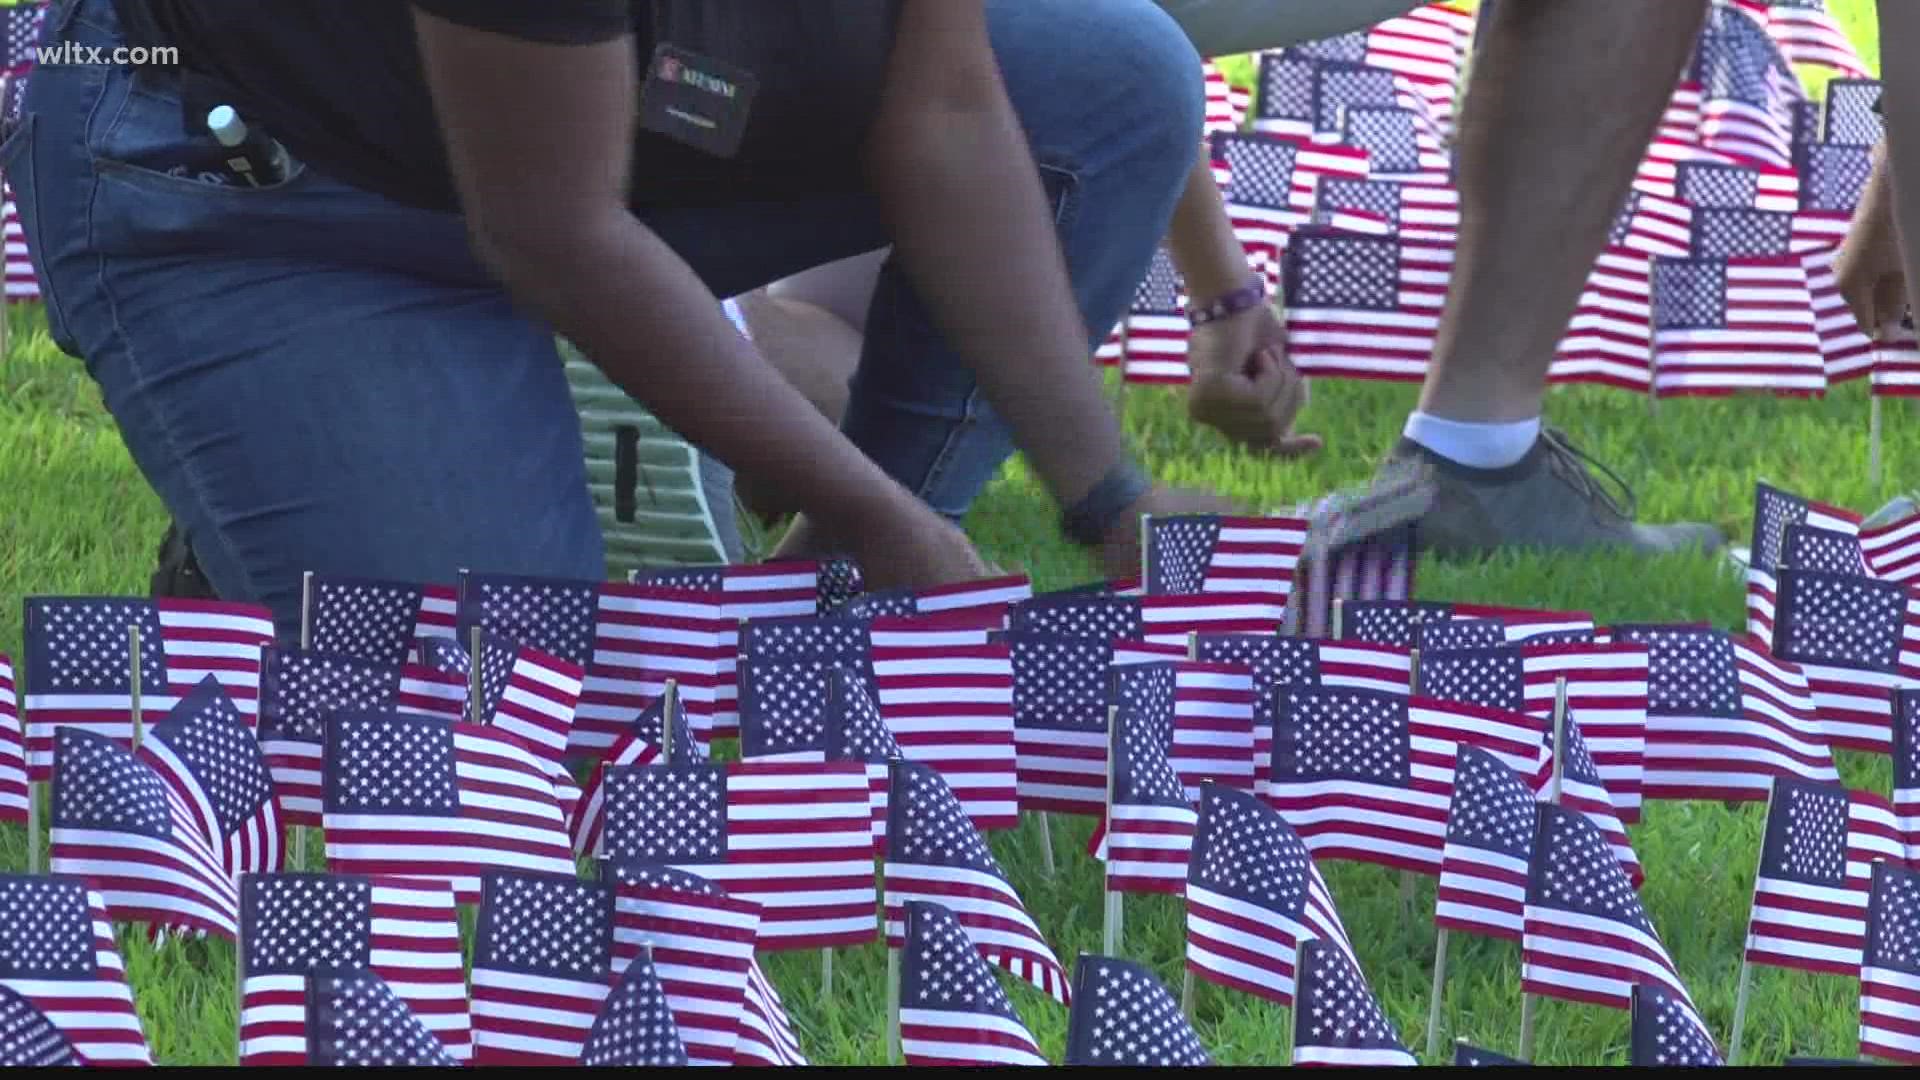 Leading up to the 20 year anniversary of 9/11, students and veterans gathered on campus to remember the fallen.